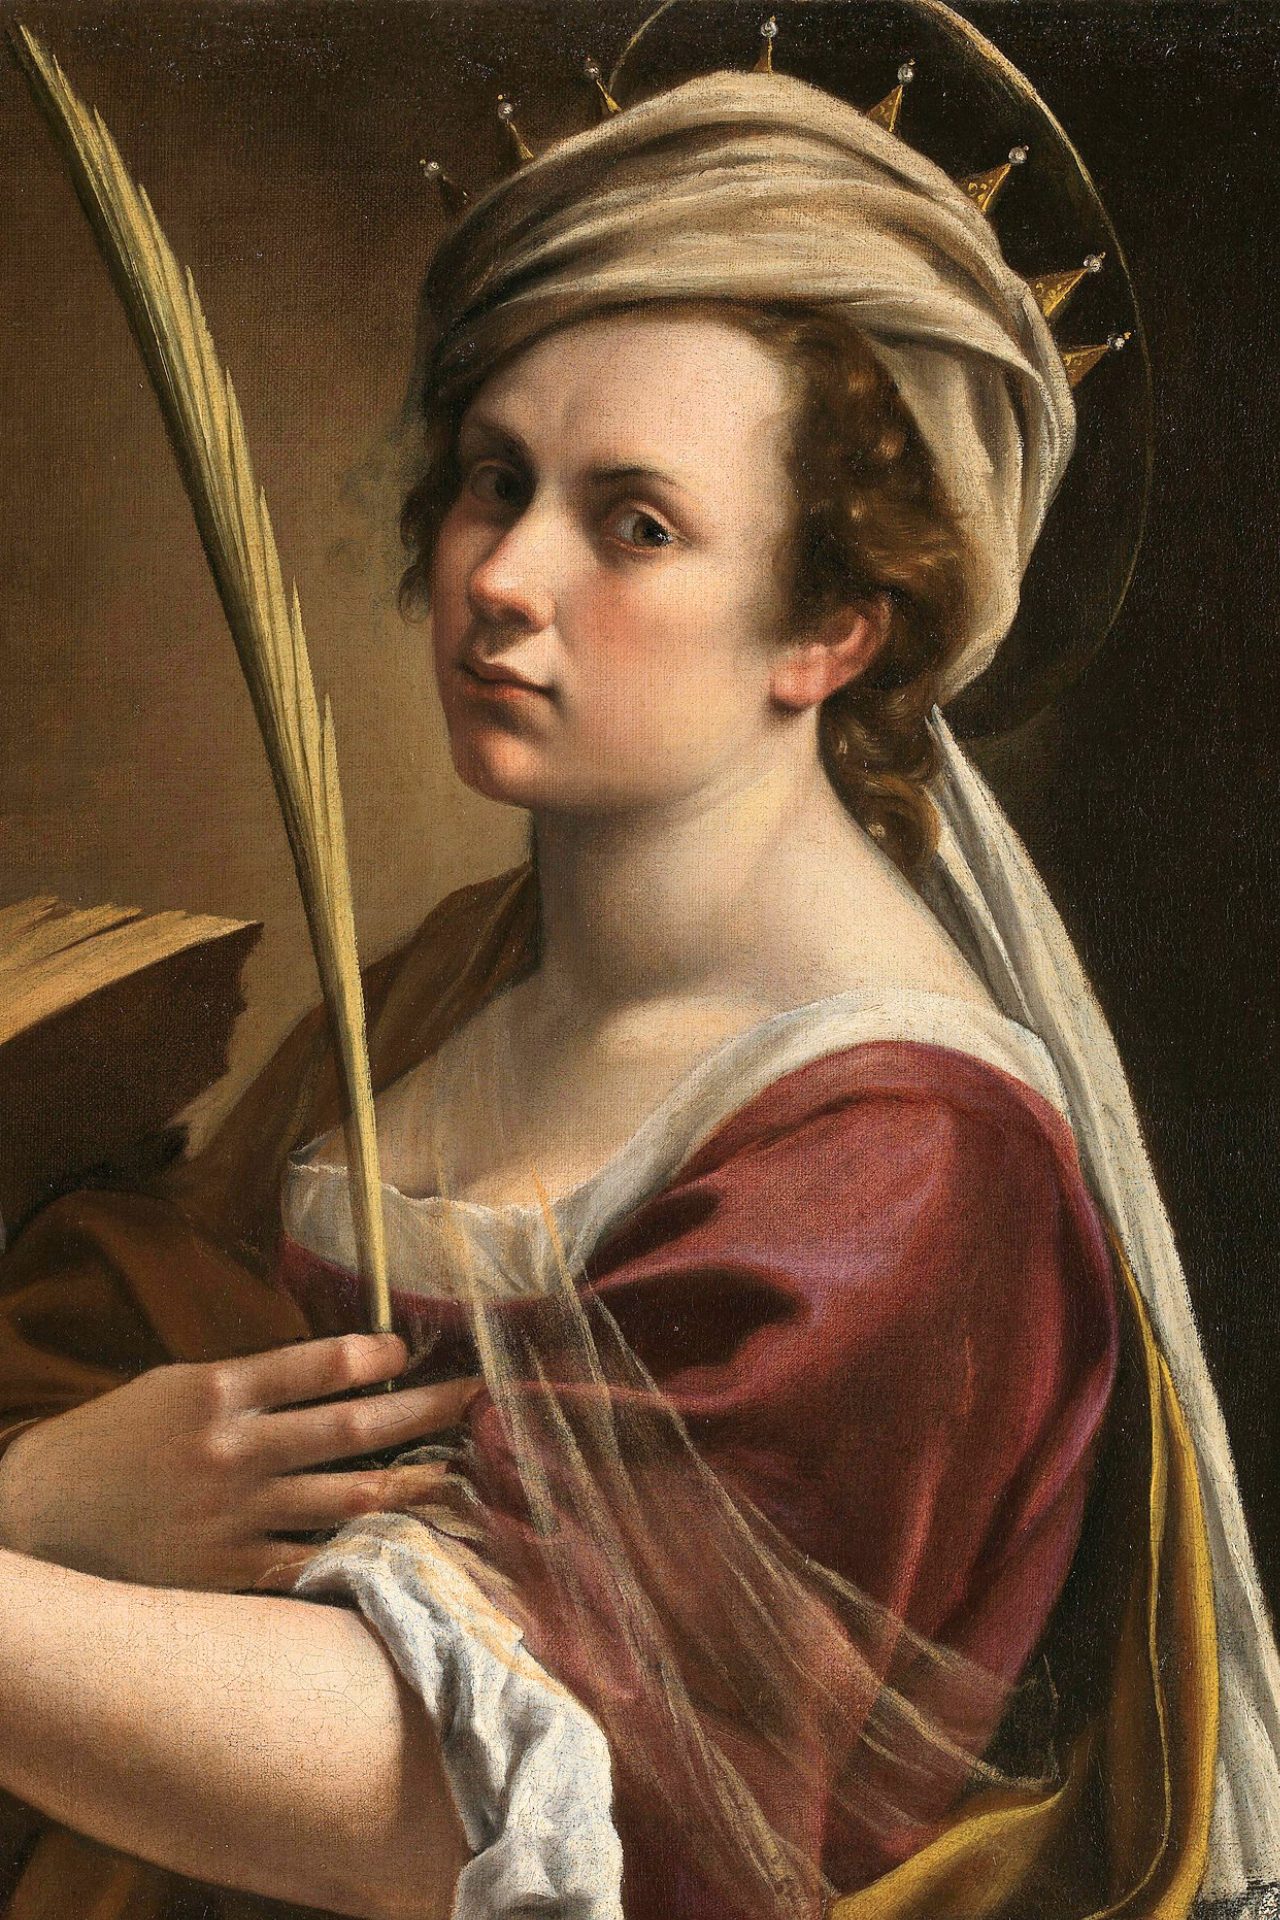 Artemisia portrays herself as Saint Catherine in the painting. She gently grasps a palm leaf in her hand, representing a Christian martyr's symbol. A somewhat translucent veil can be seen covering her chest and arm alongside the palm.